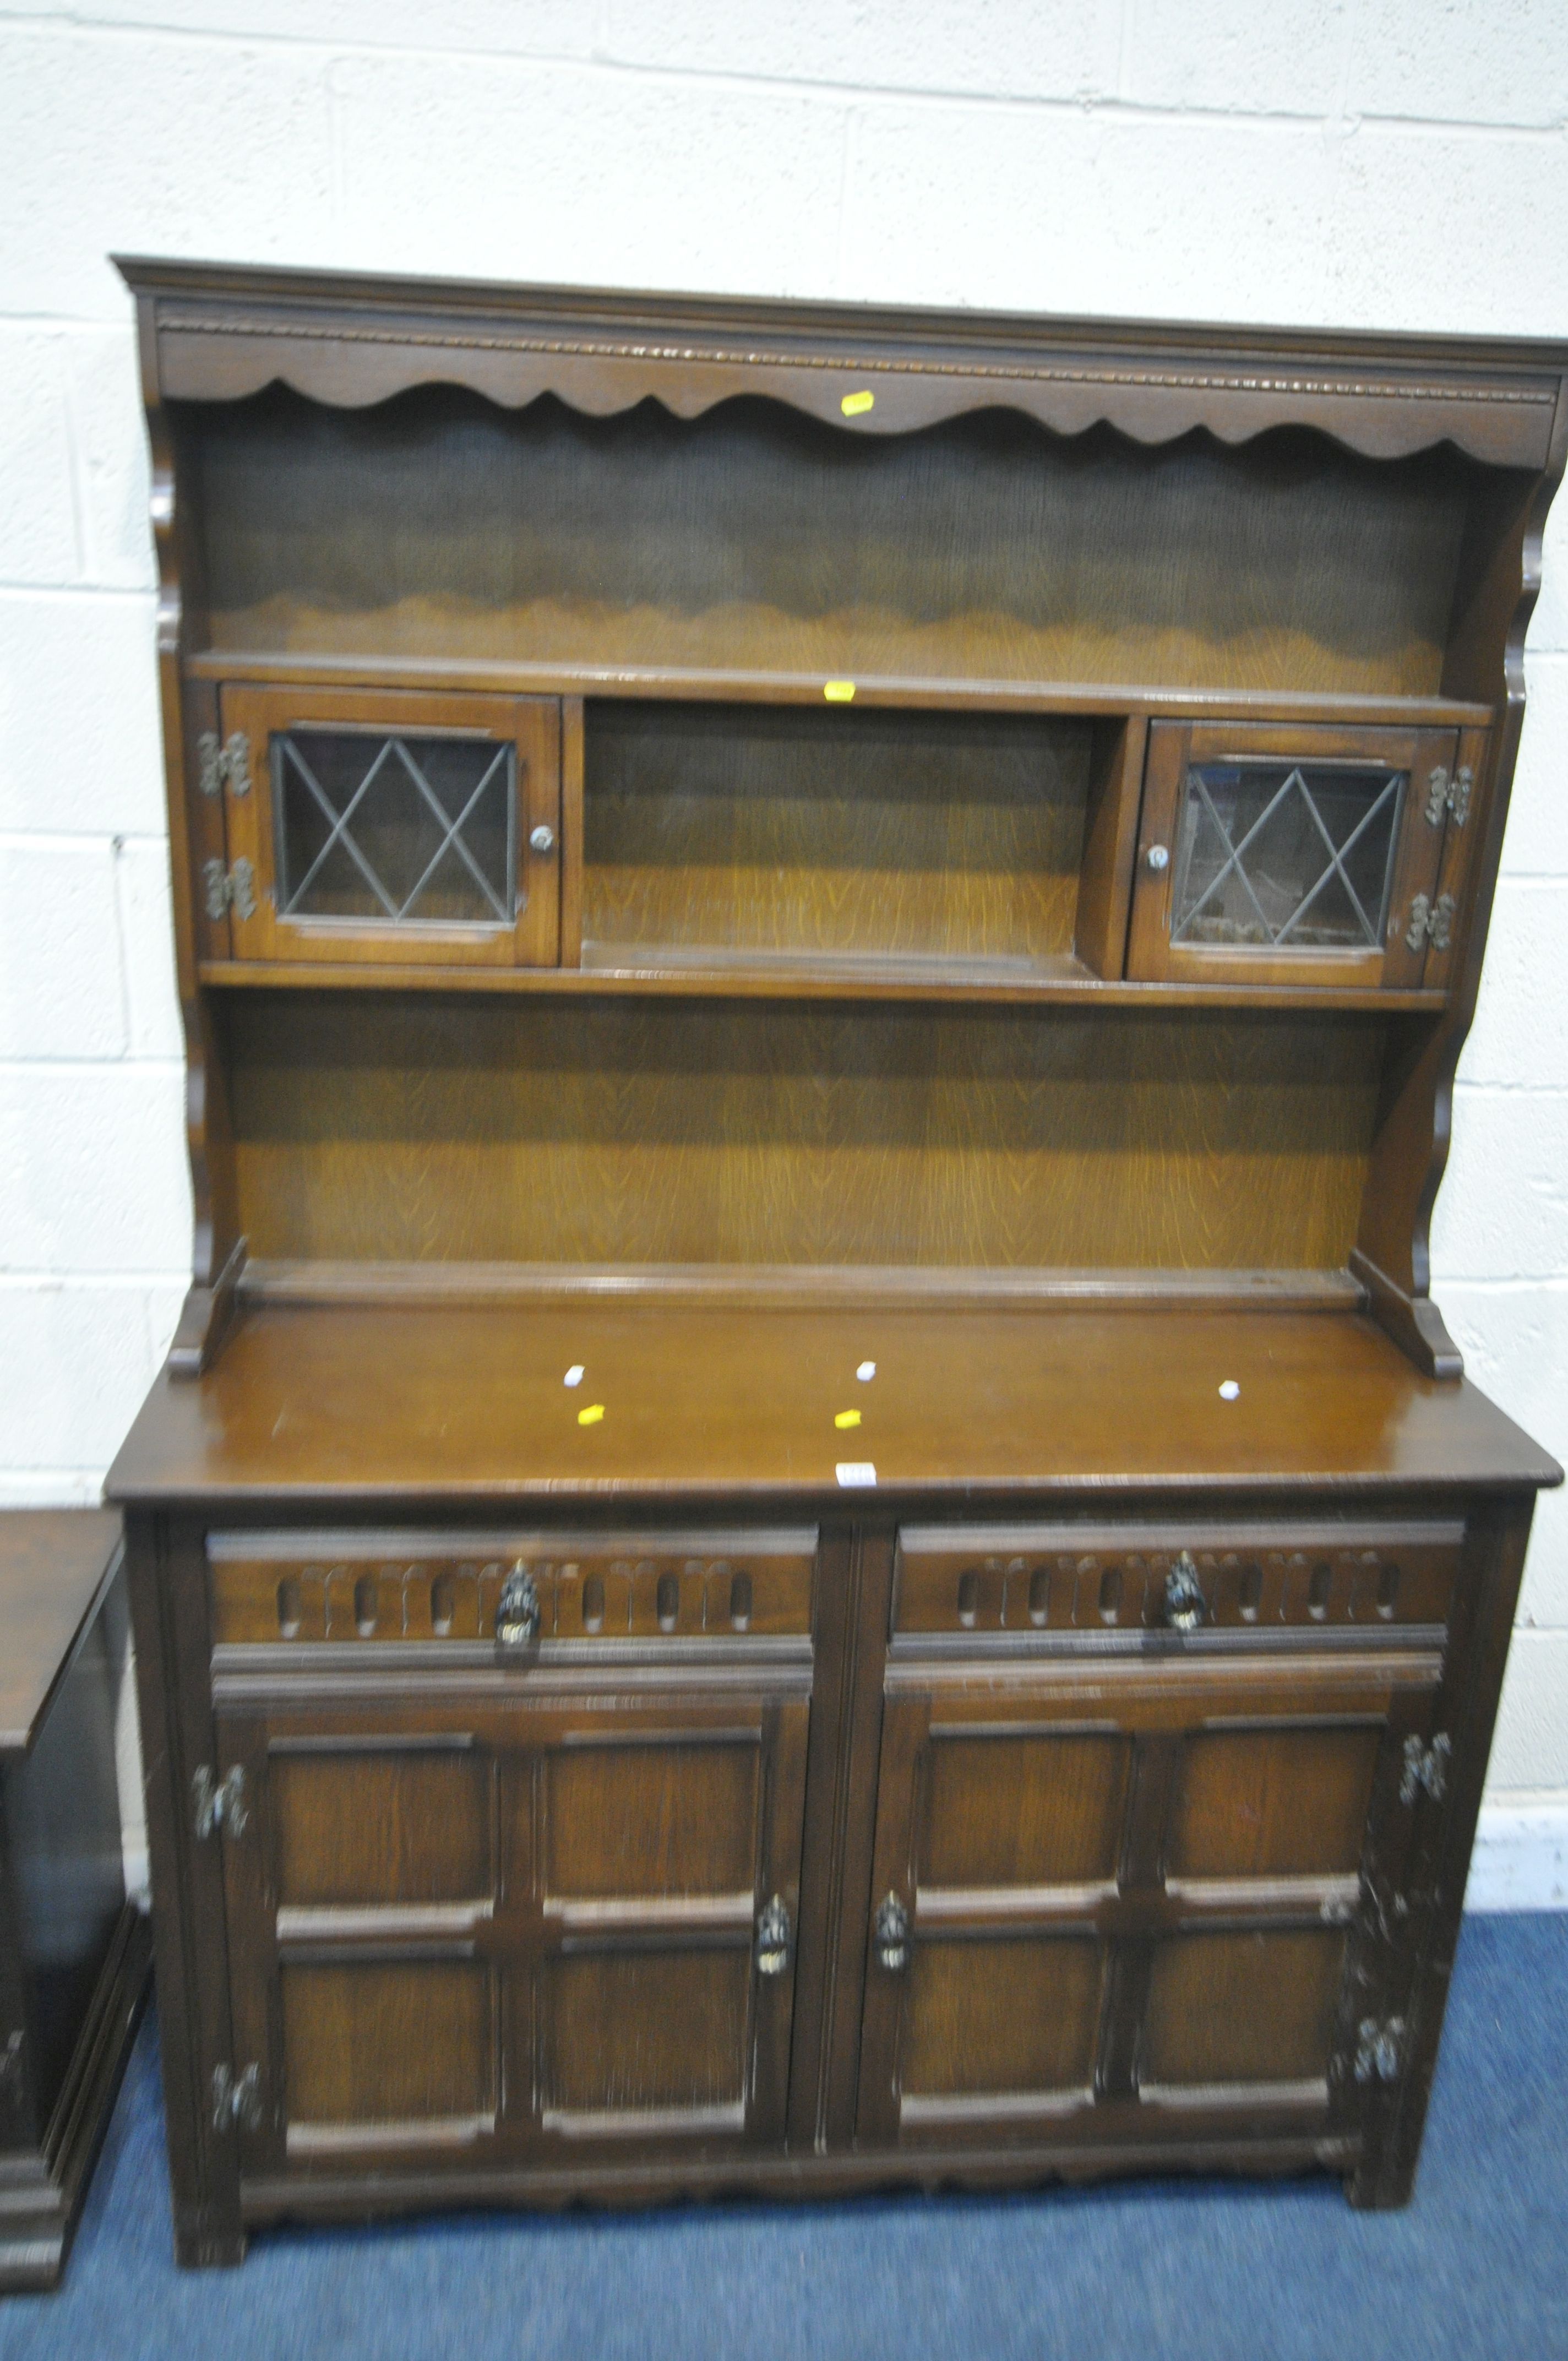 A GRANGEMOOR OAK DRESSER, fitted with two lead glazed doors, a two tier plate rack, atop a base with - Image 2 of 5